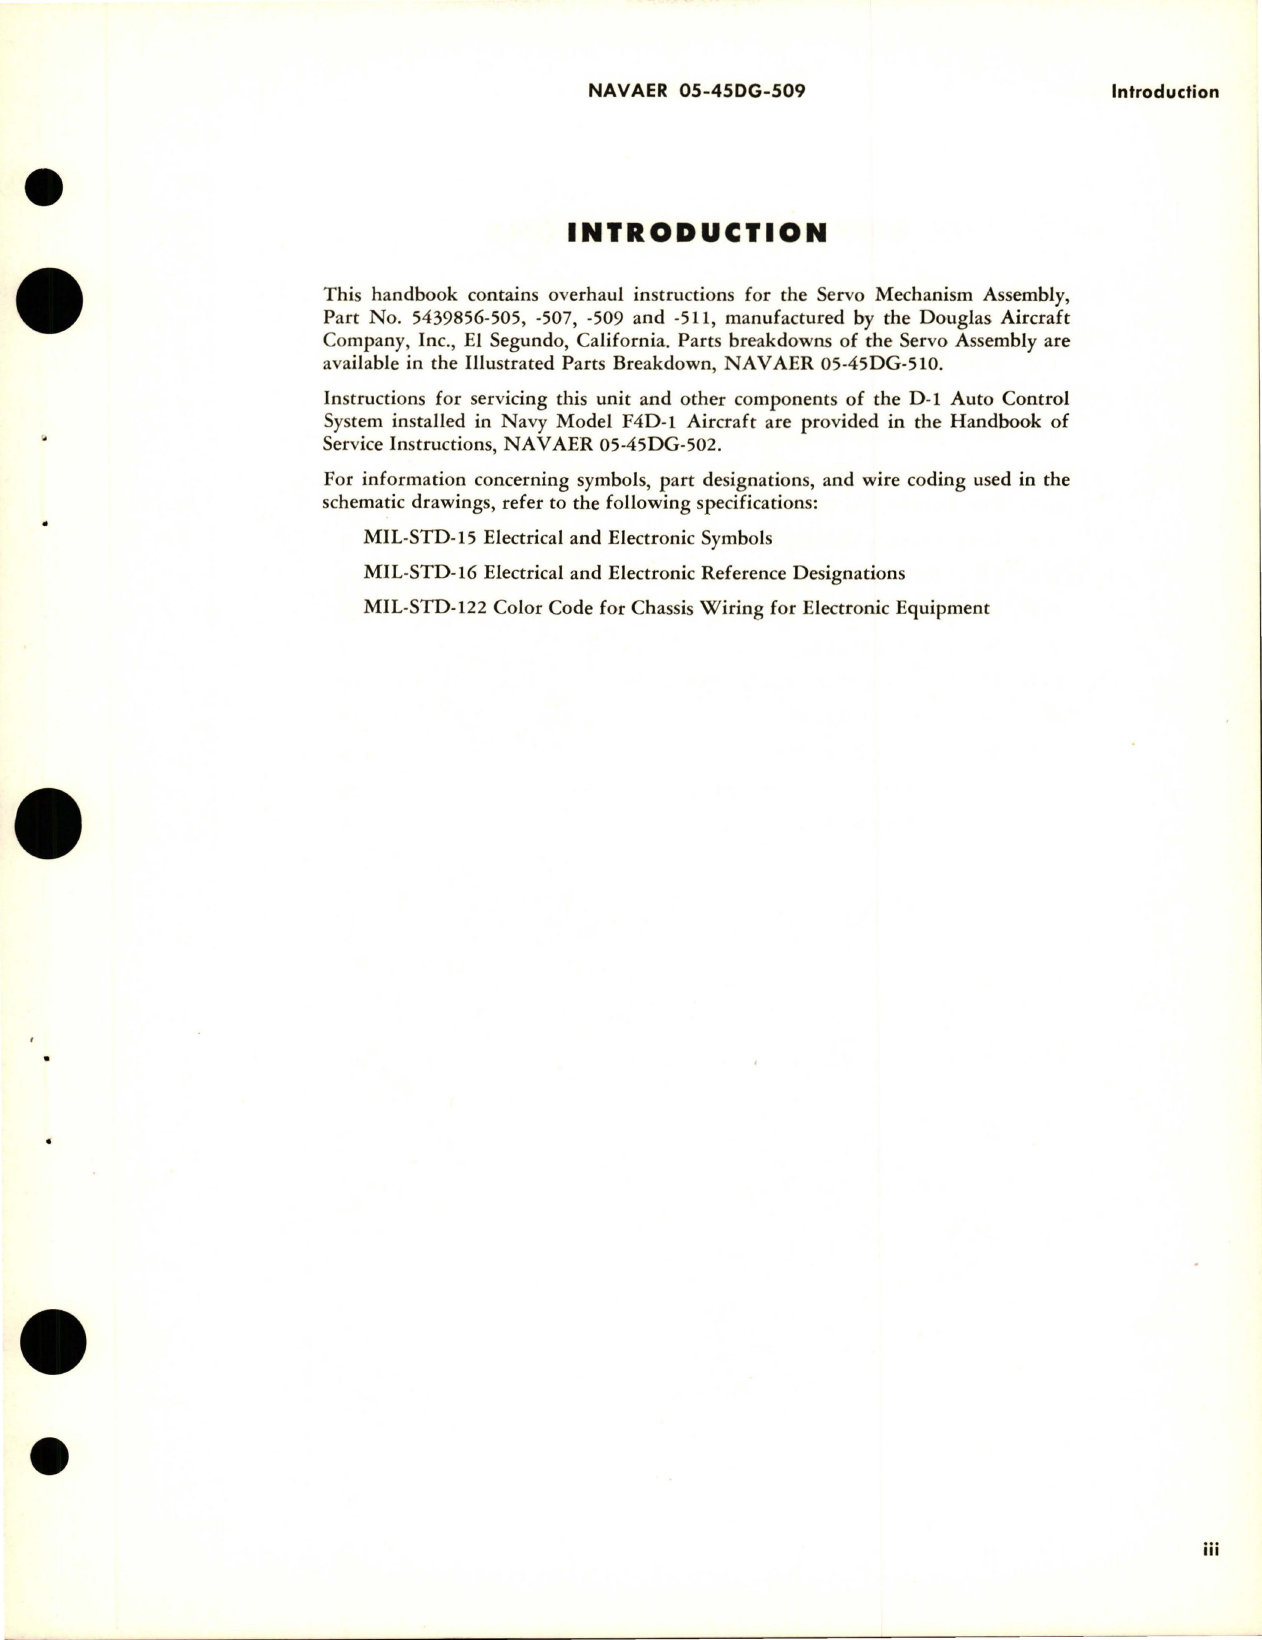 Sample page 5 from AirCorps Library document: Overhaul Instructions for Servo Mechanism Assembly for D-1 Auto Control System